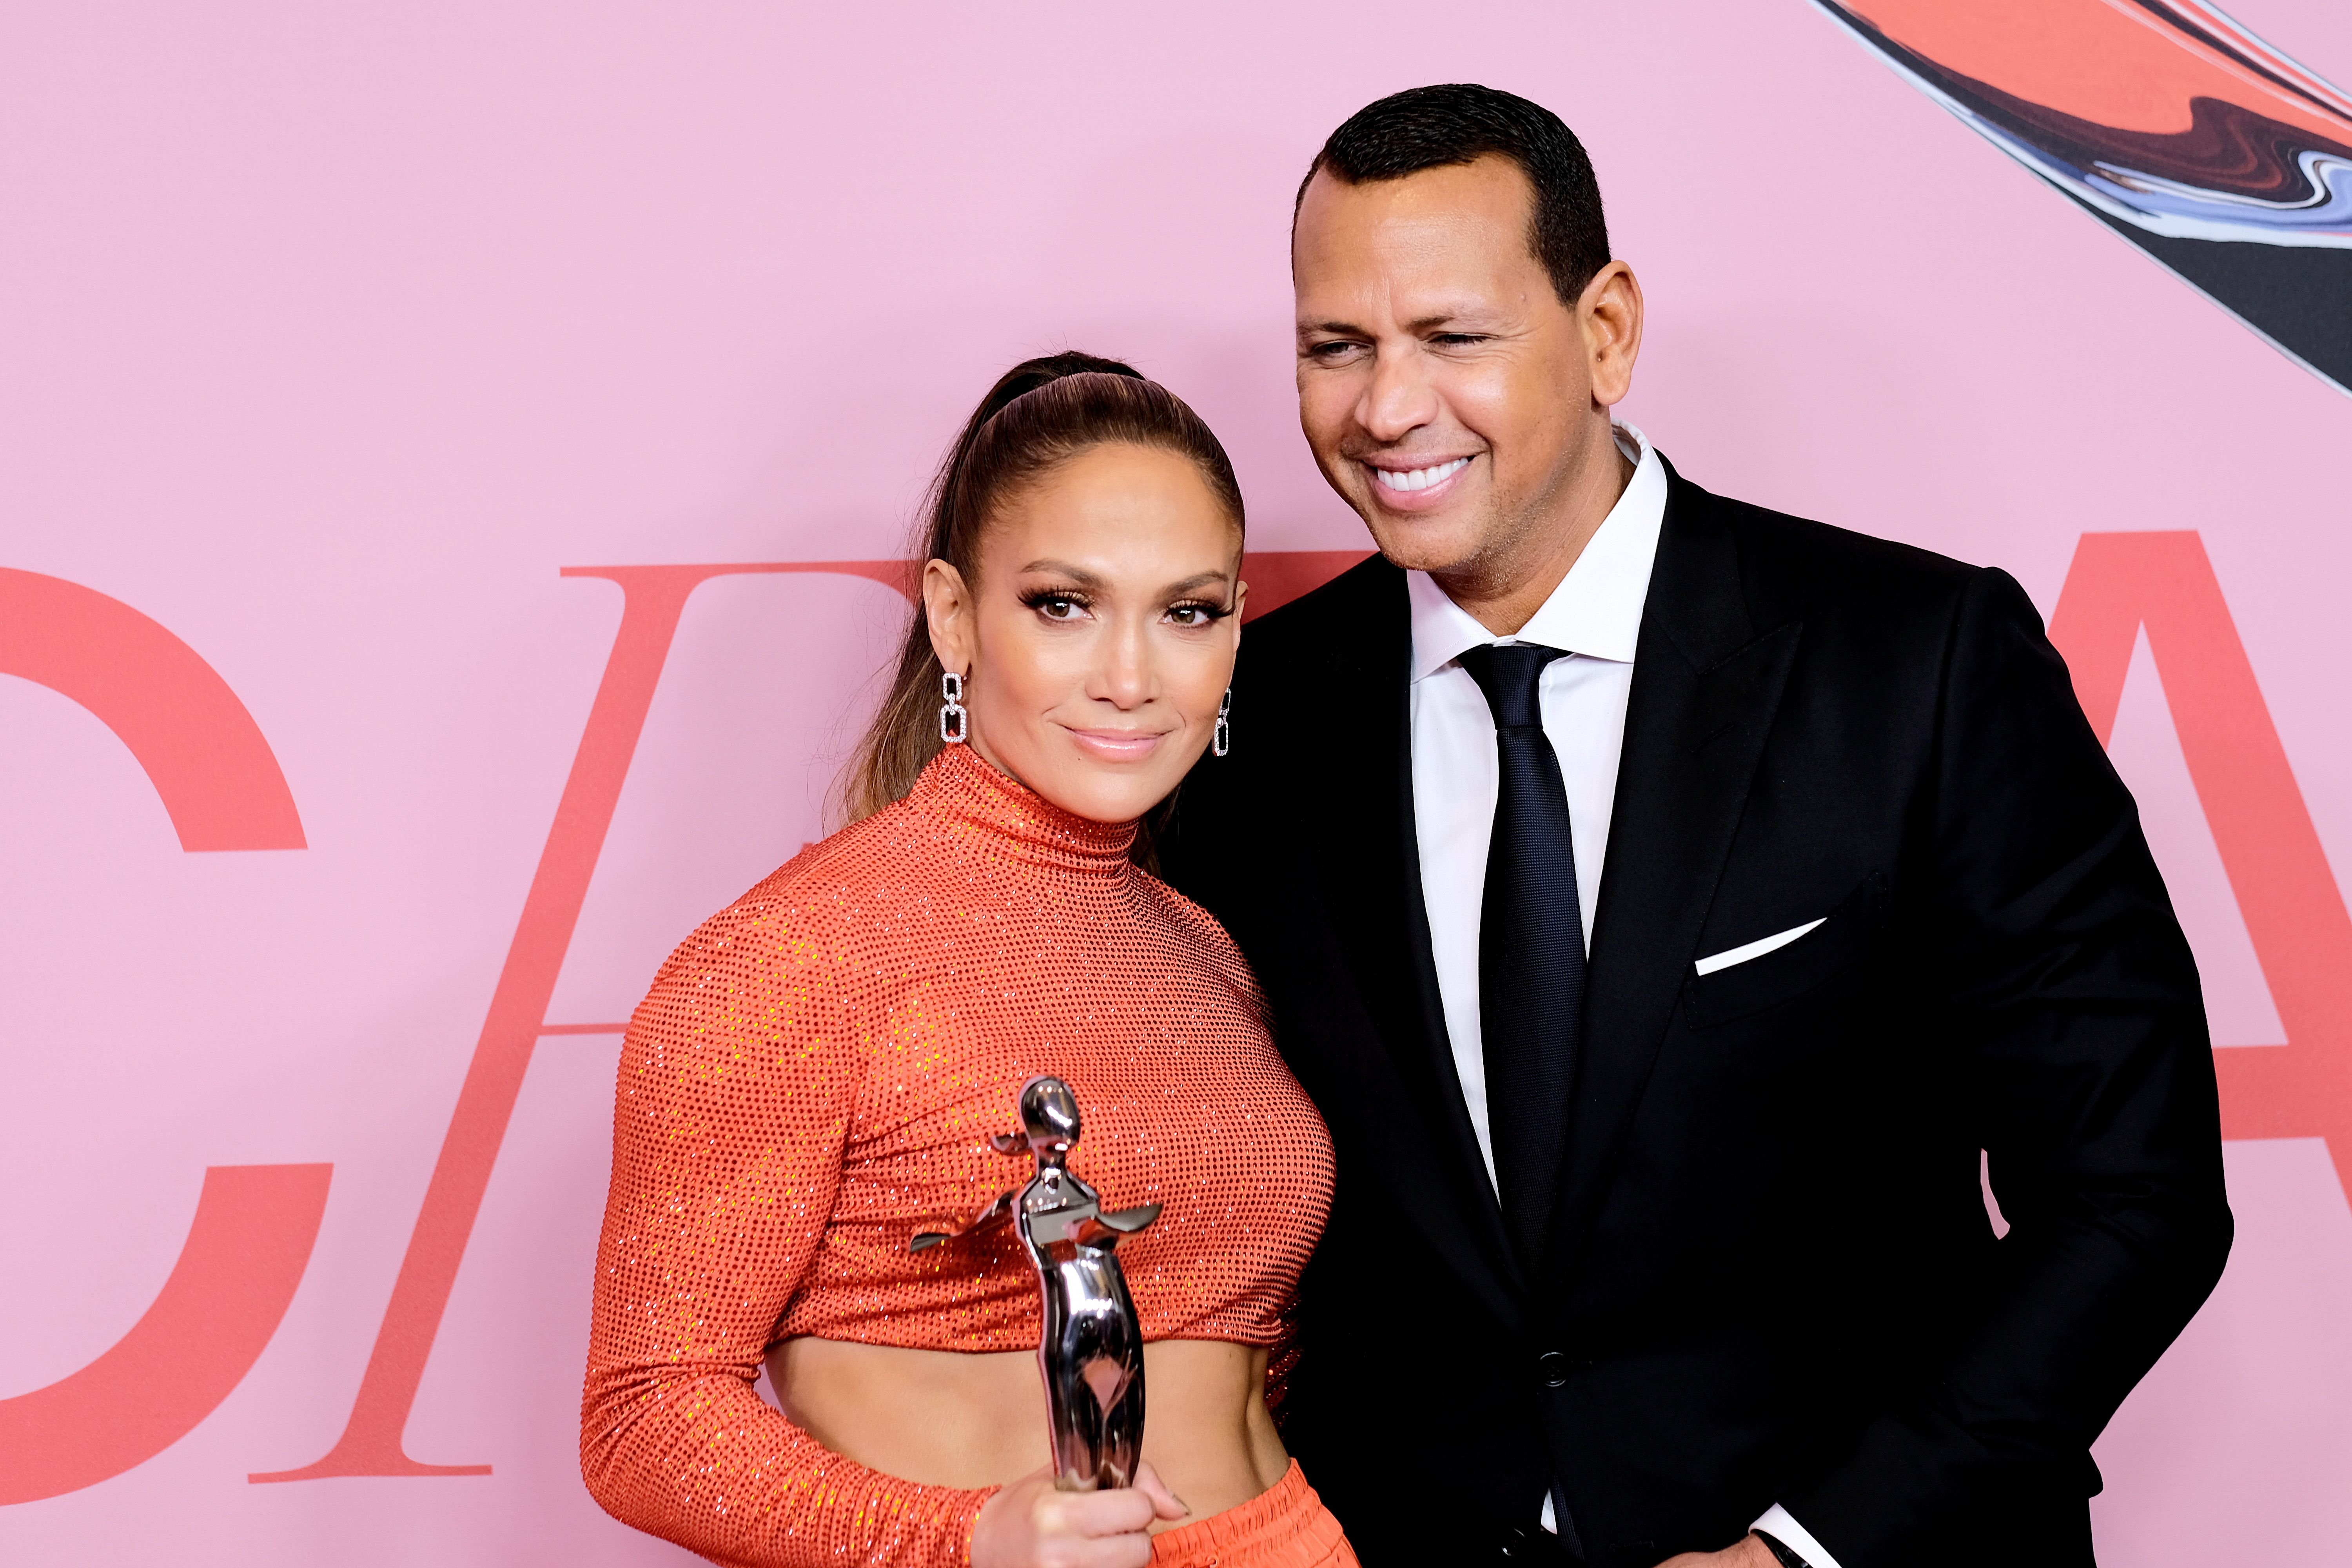 Jennifer Lopez and Alex Rodriguez at Winners Walk during the CFDA Fashion Awards on June 03, 2019, in New York City | Photo: Dimitrios Kambouris/Getty Images